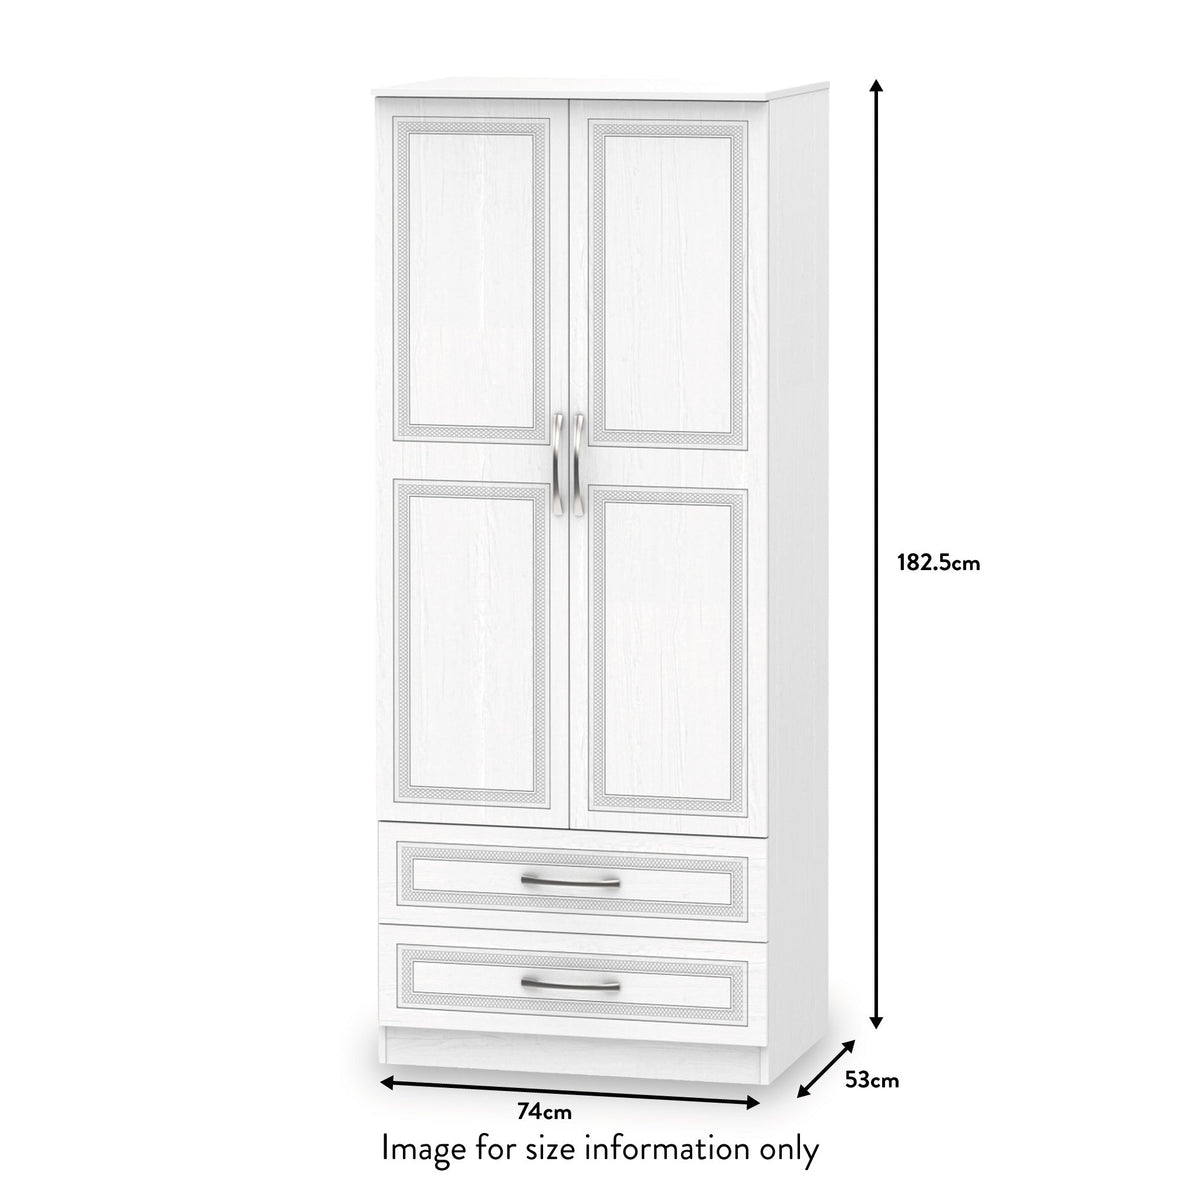 Killarth White Double Wardrobe with 2 Doors and 2 Drawers dimensions